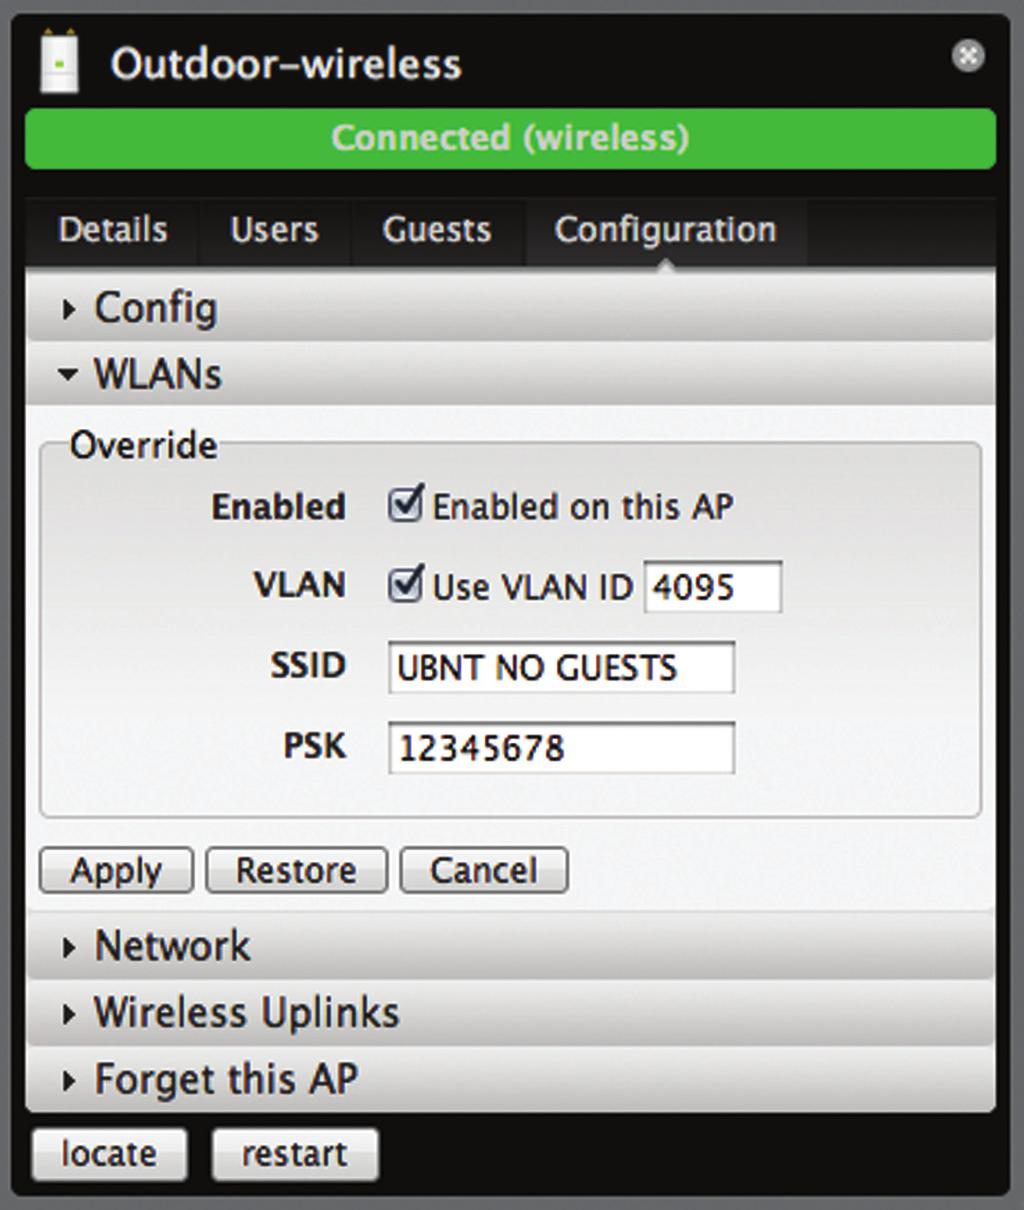 WLANs Allows the deployment of different WLANs on different Access Points.